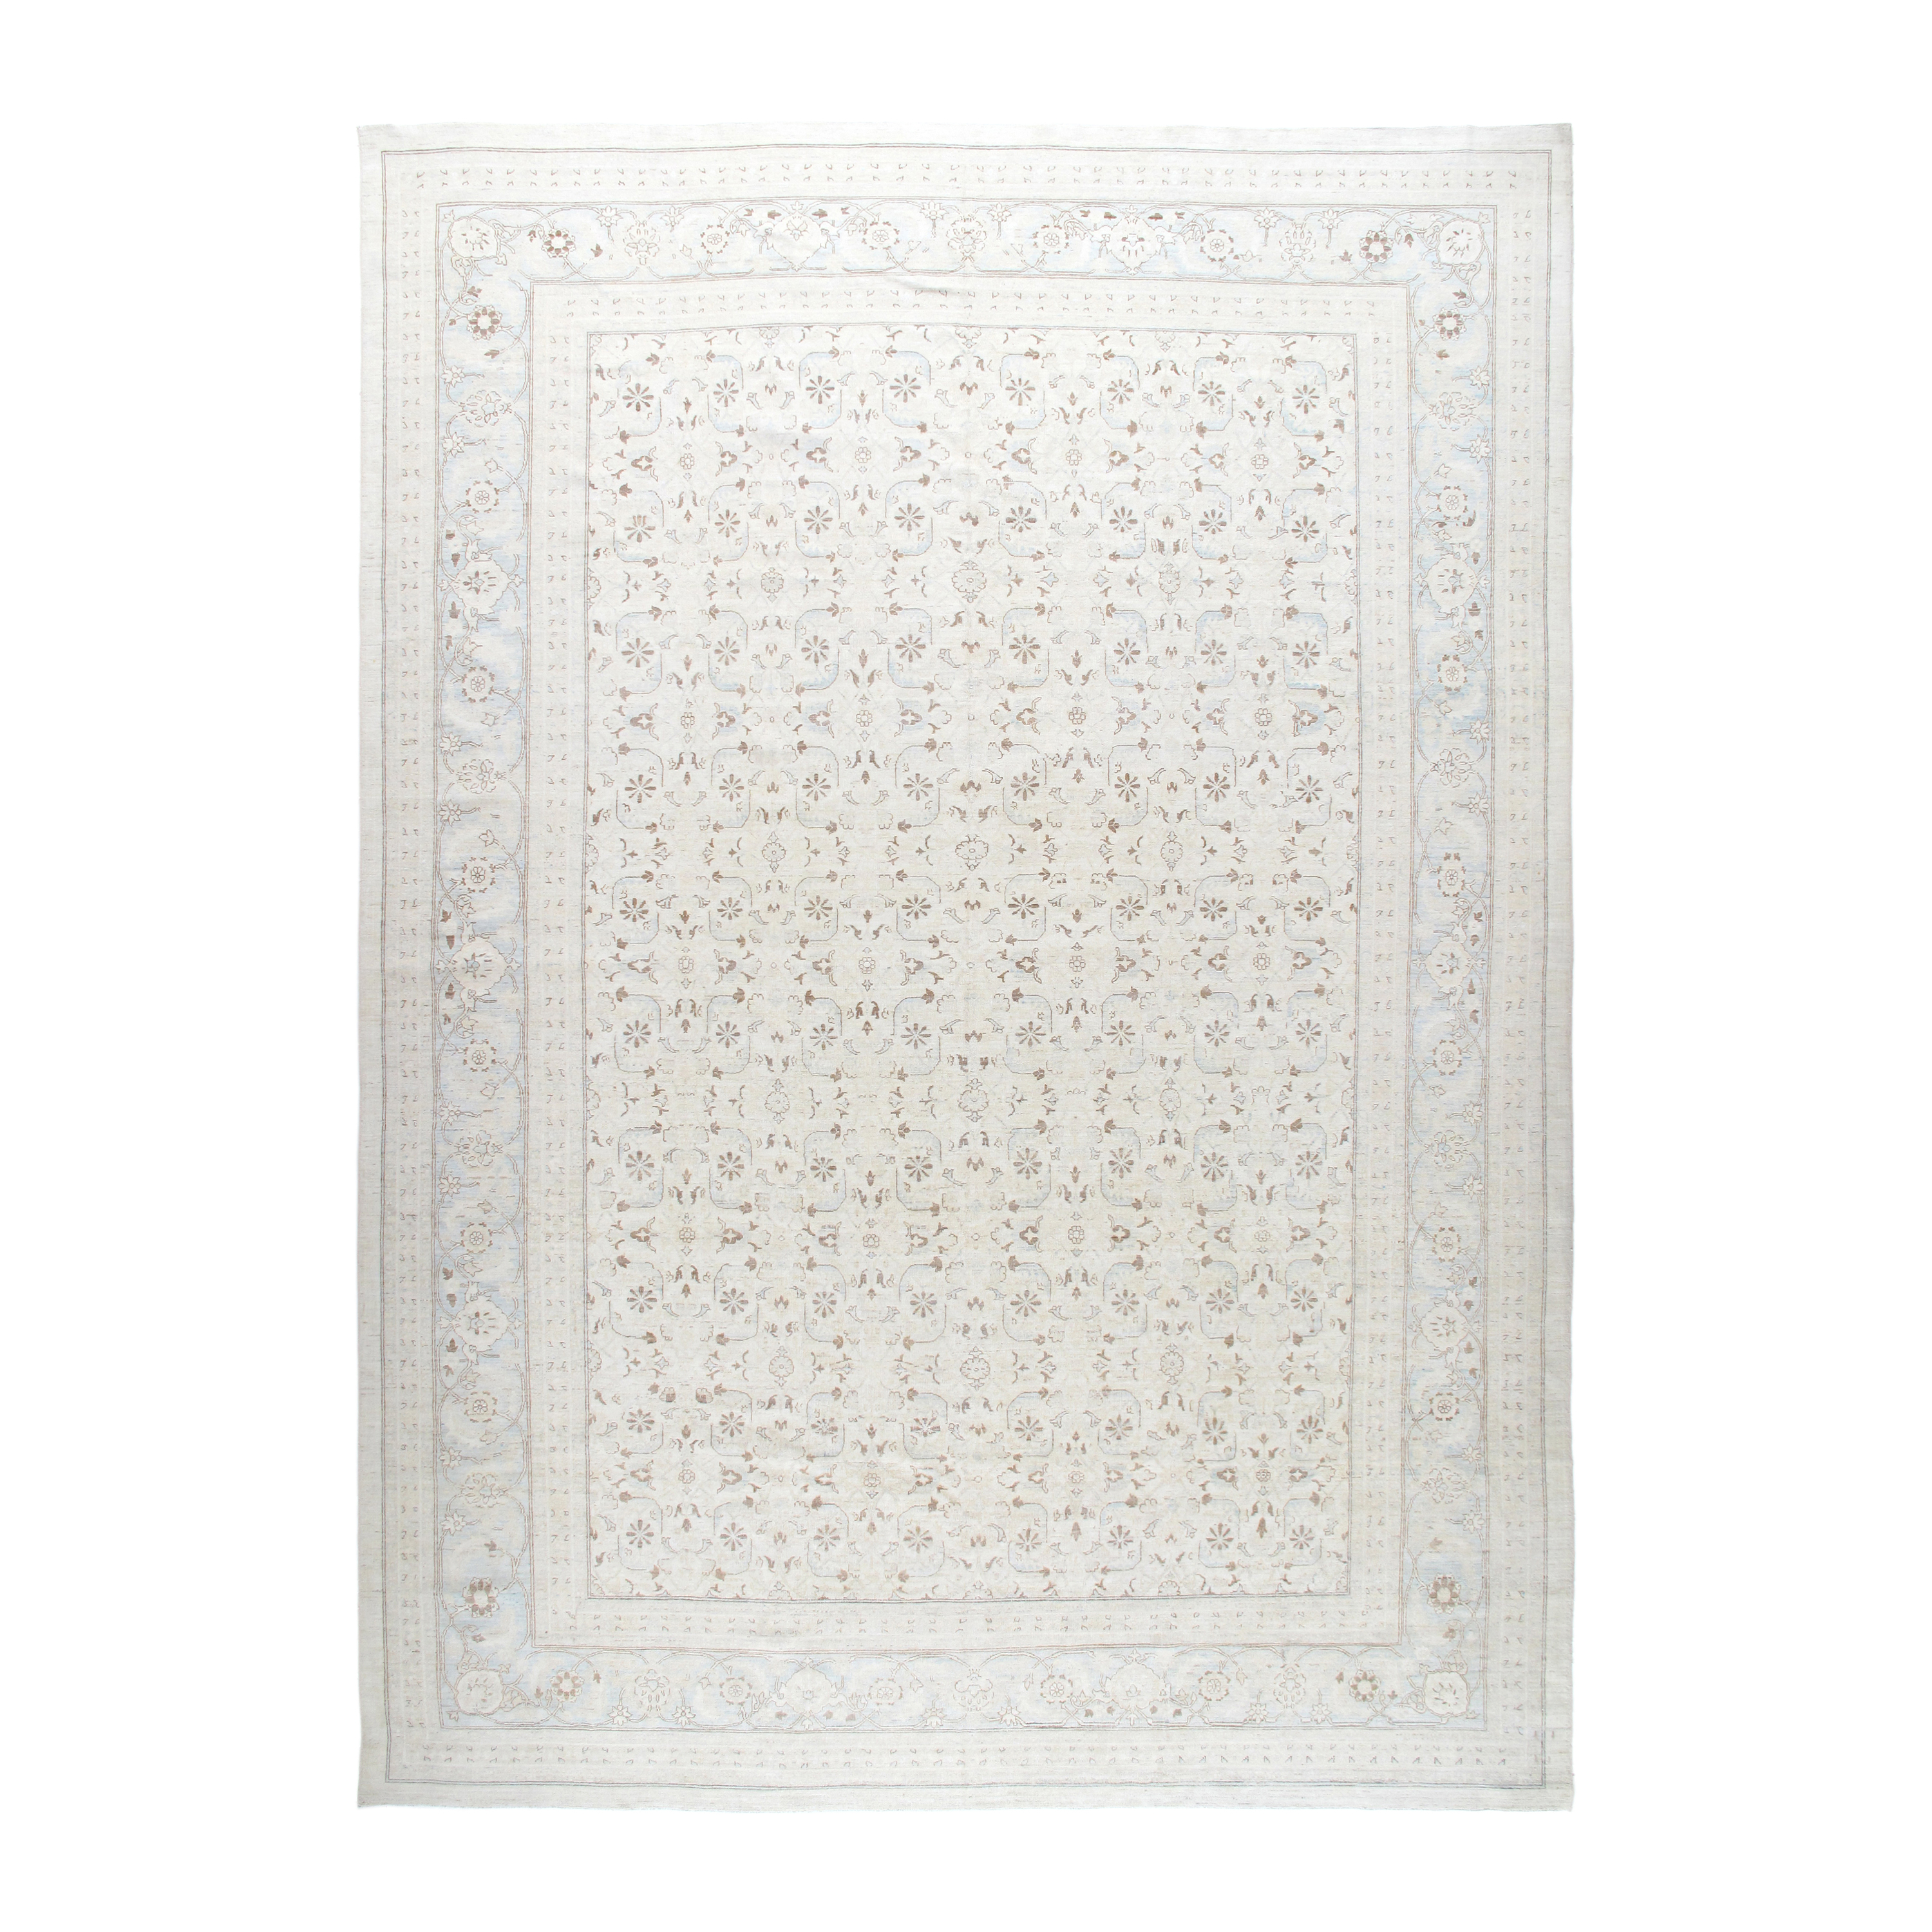 The Agra Traditional Rug